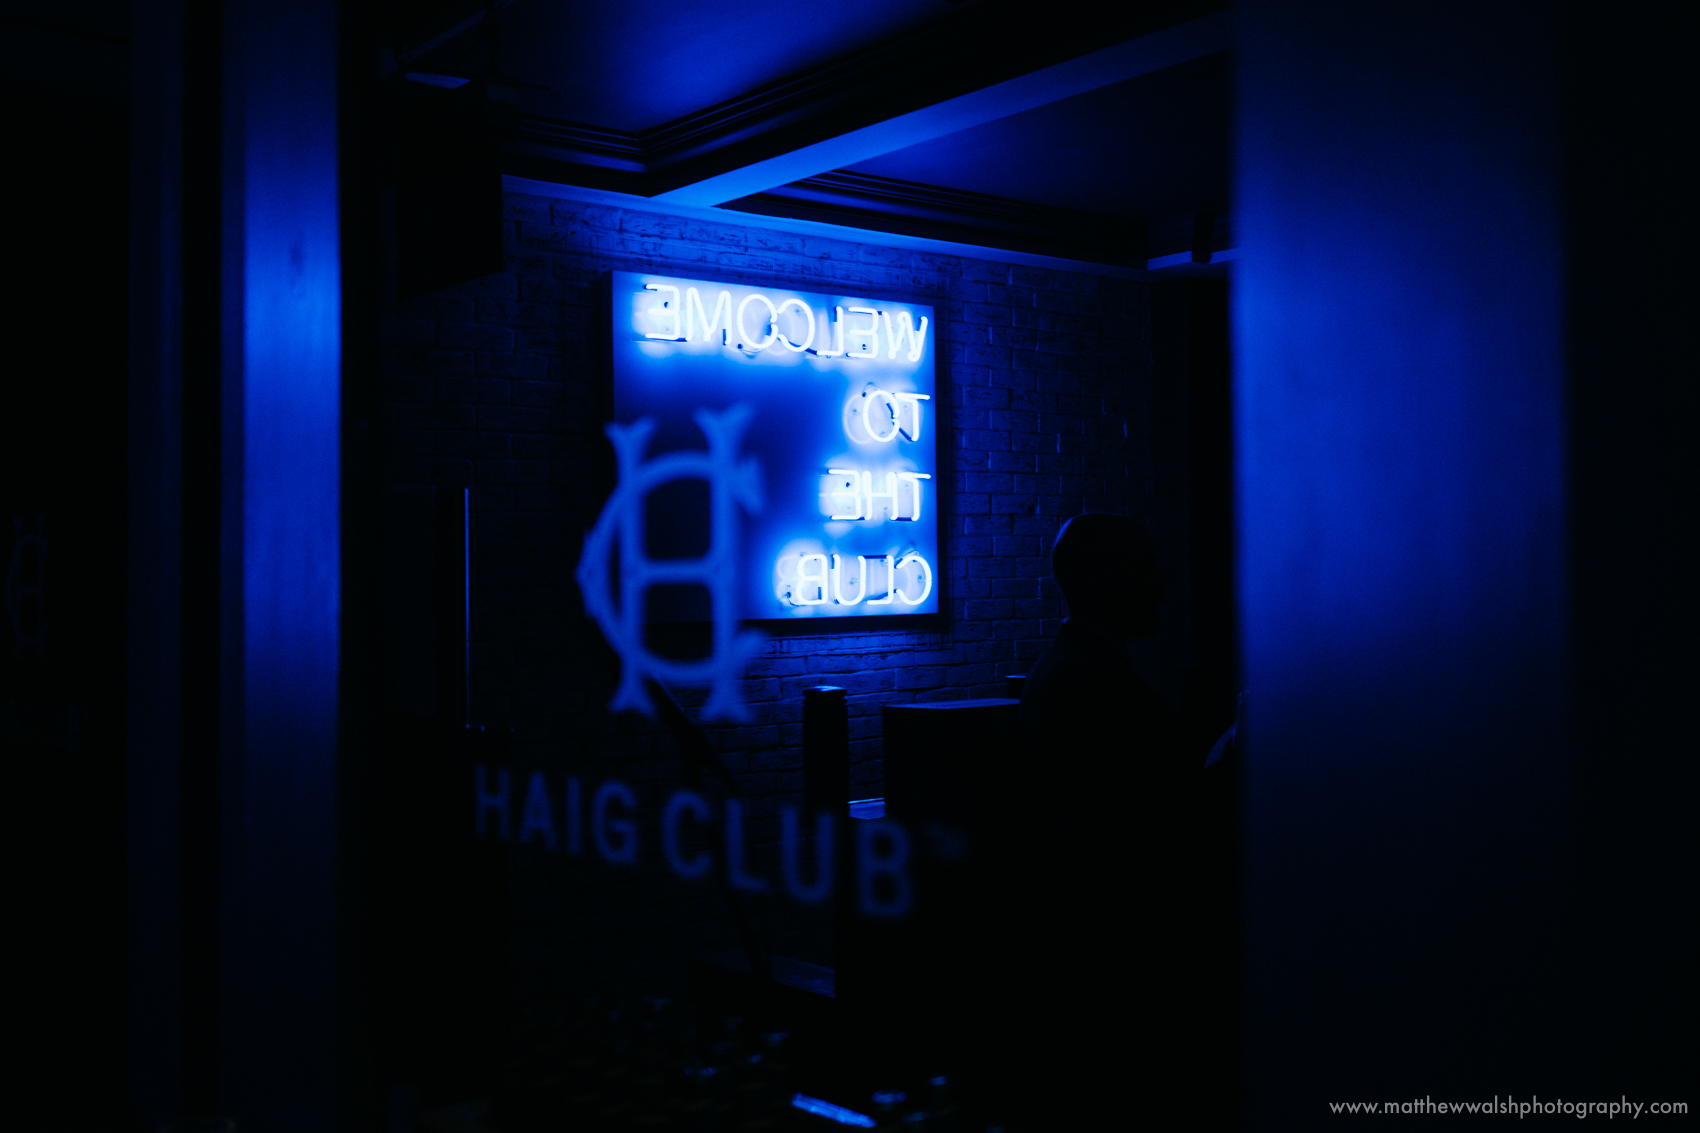 Welcome to the club - neon sign for the Haig Club Manchester